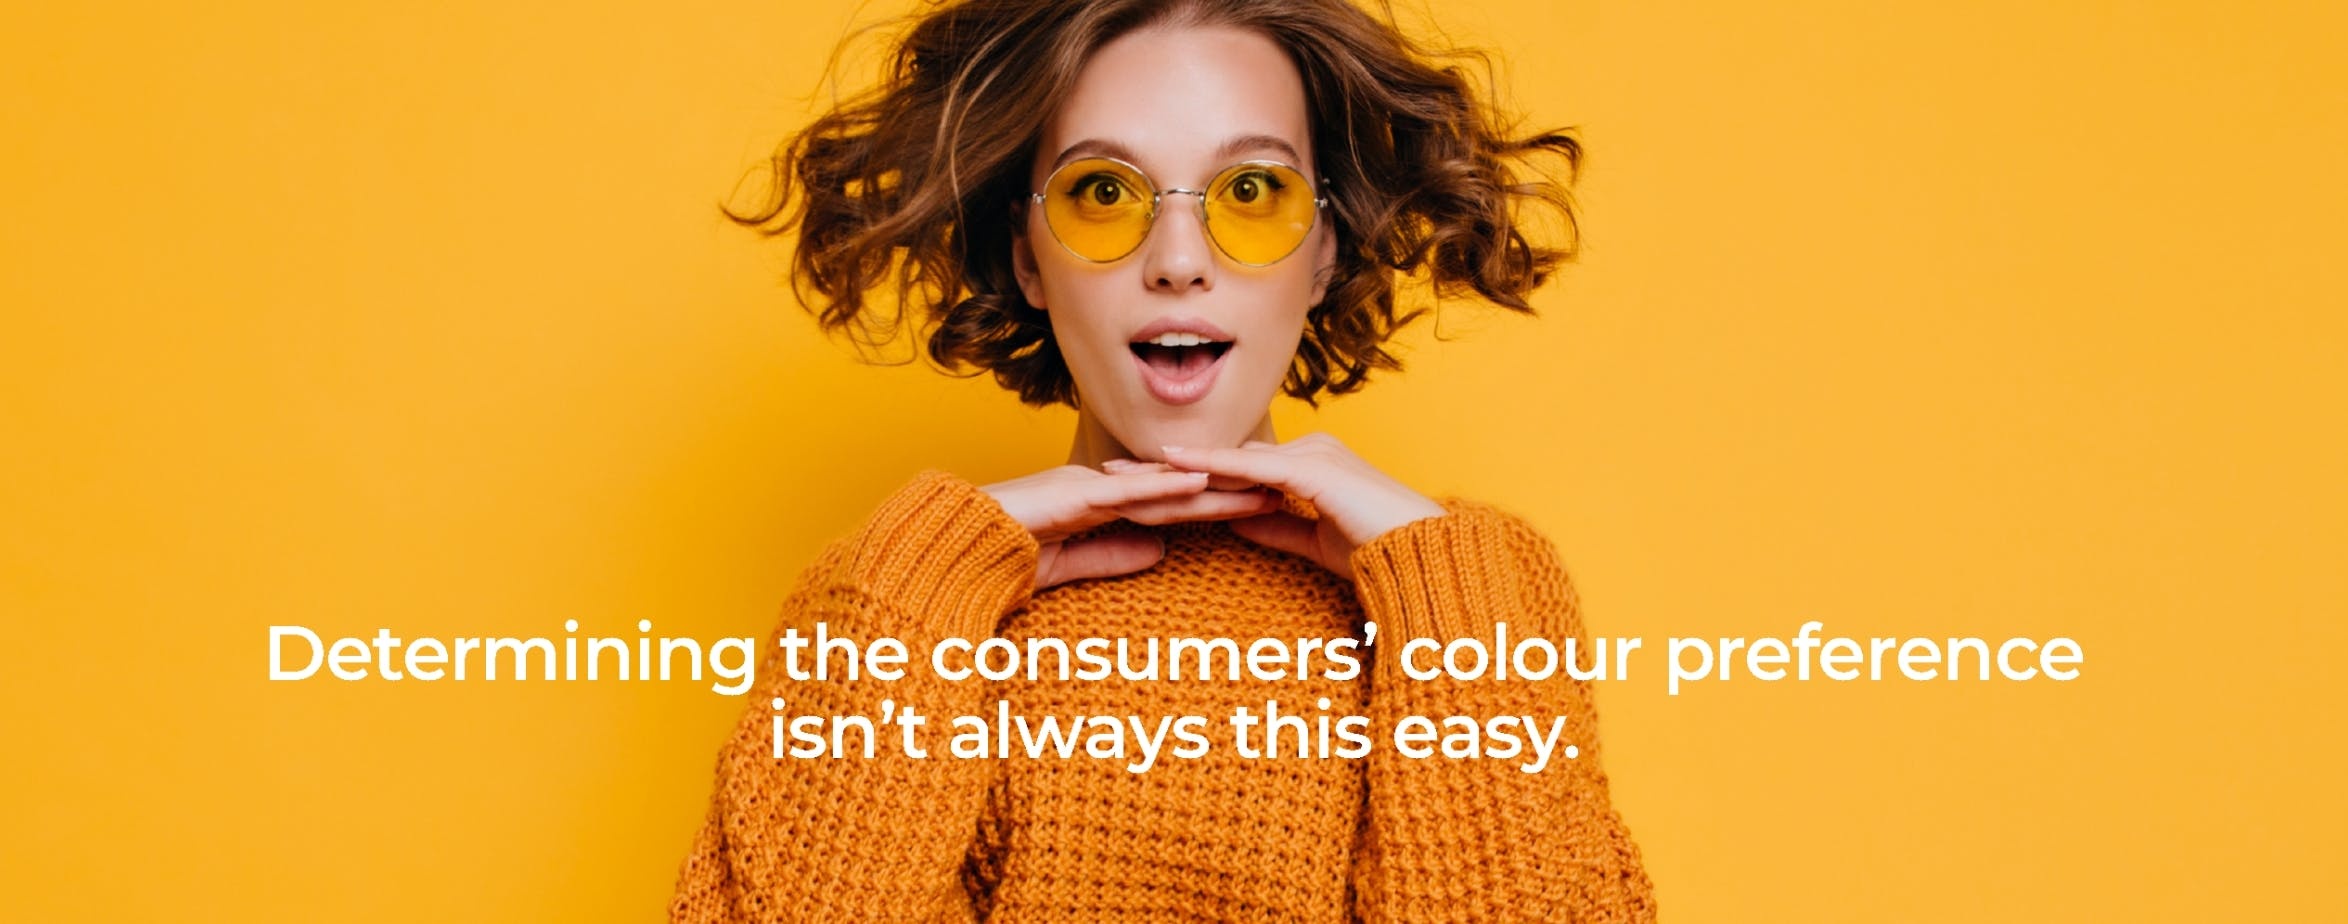 woman with orange glasses and sweater on an orange background